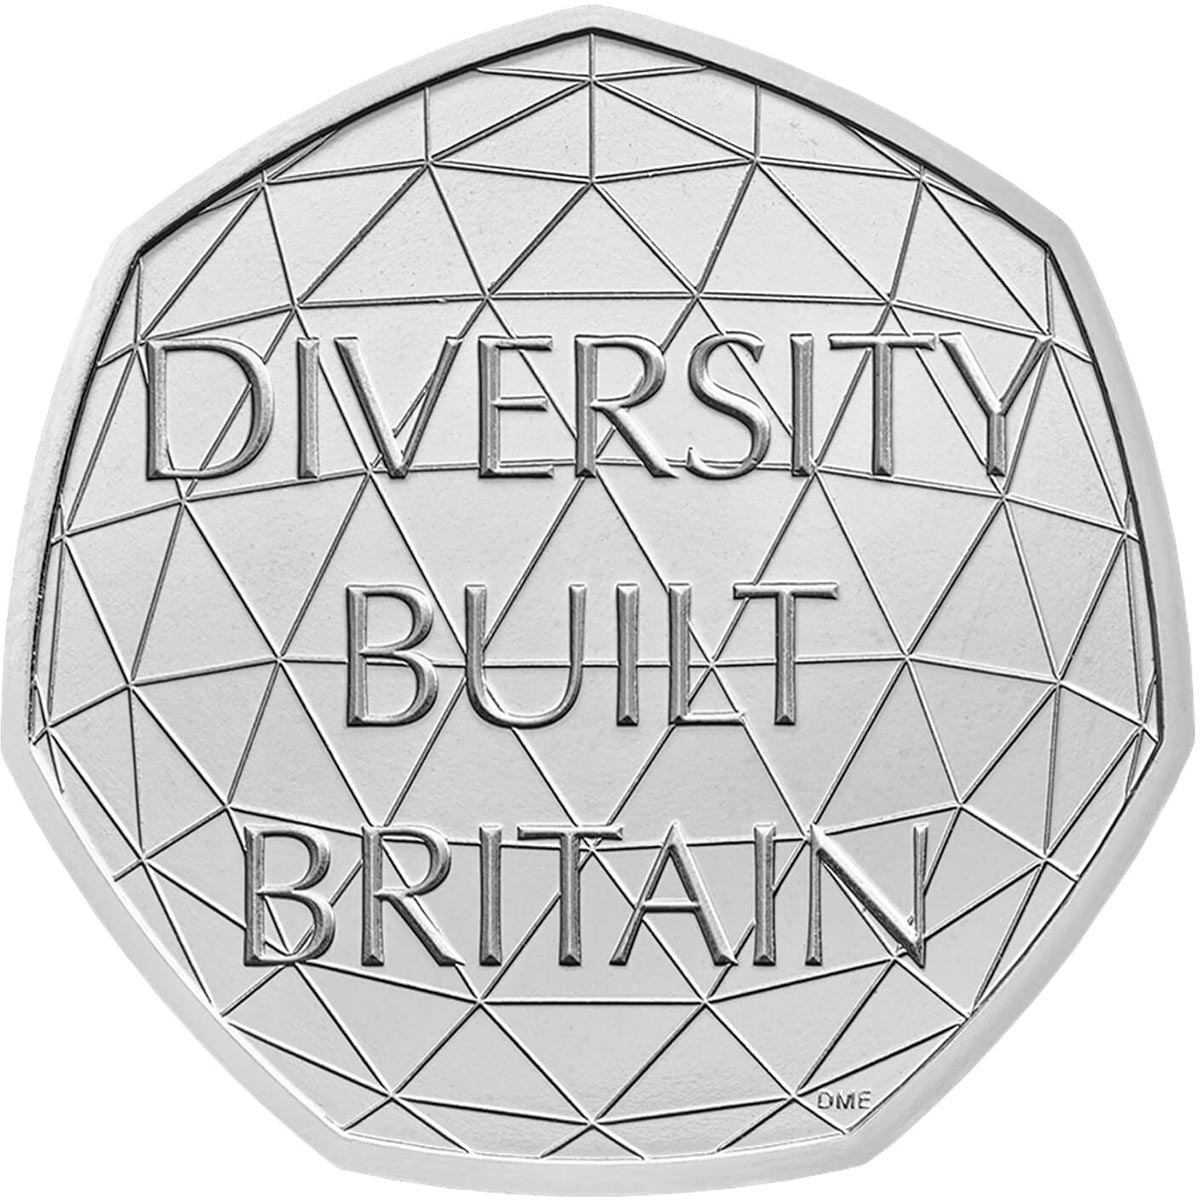 Image of 50 pence coin - British Diversity | United Kingdom 2020.  The Copper–Nickel (CuNi) coin is of Proof, BU quality.